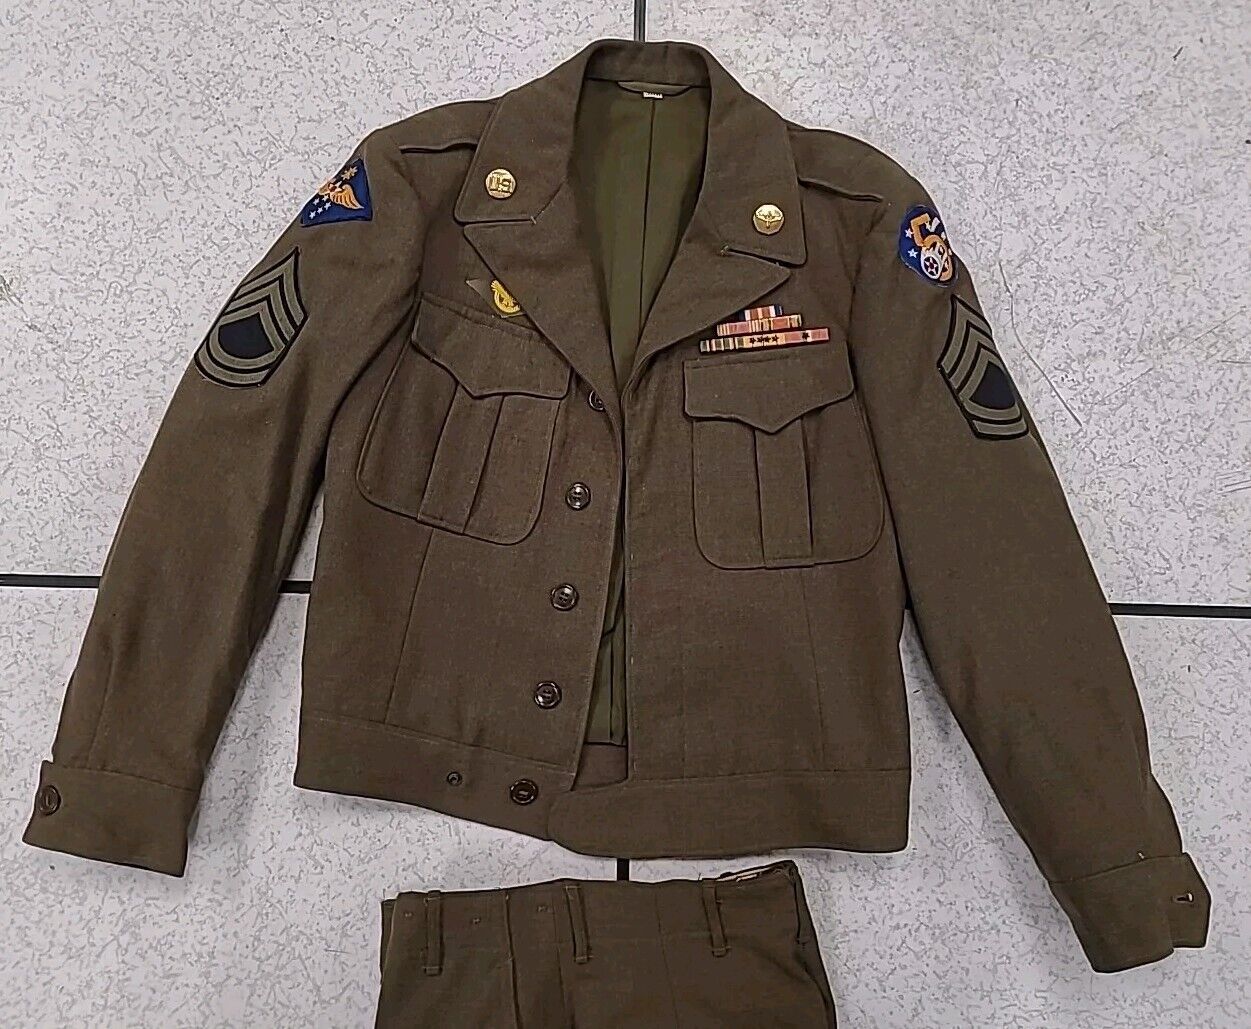  WWII USAAF THEATER  5TH AIR FORCE  Uniform 36R & 29/29 Pant